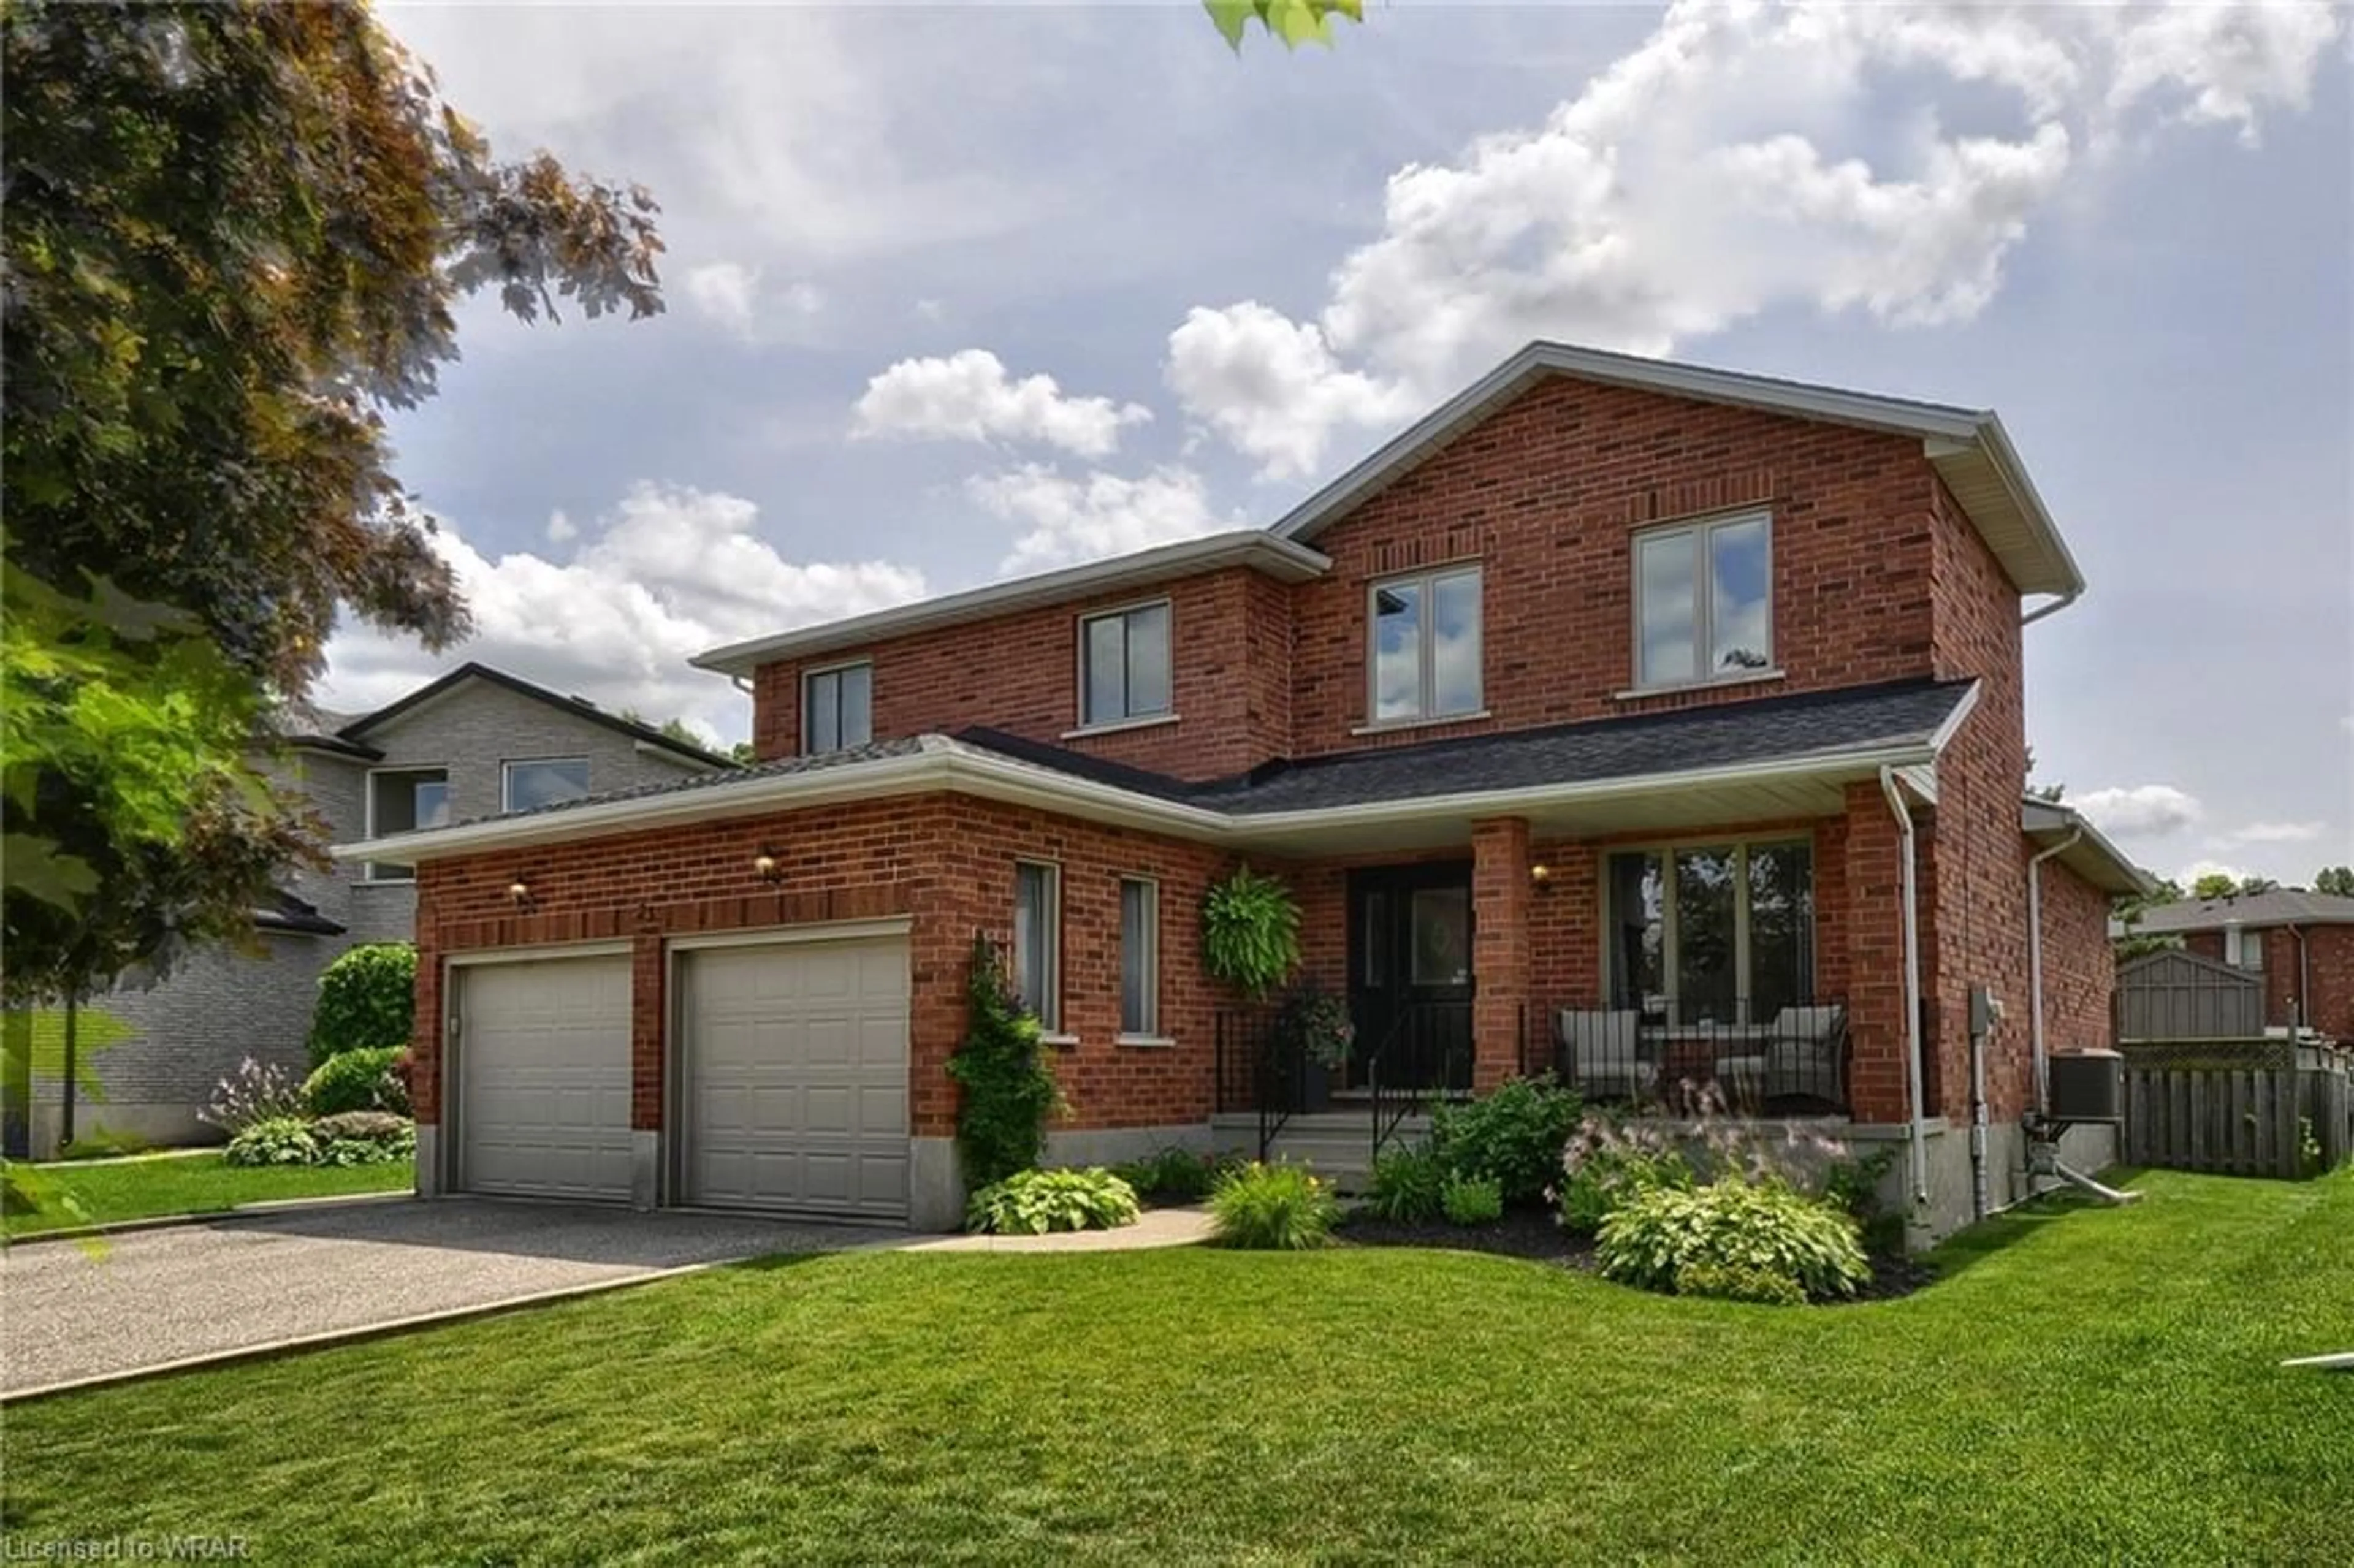 Home with brick exterior material for 23 Carlos Crt, Cambridge Ontario N1R 8H4